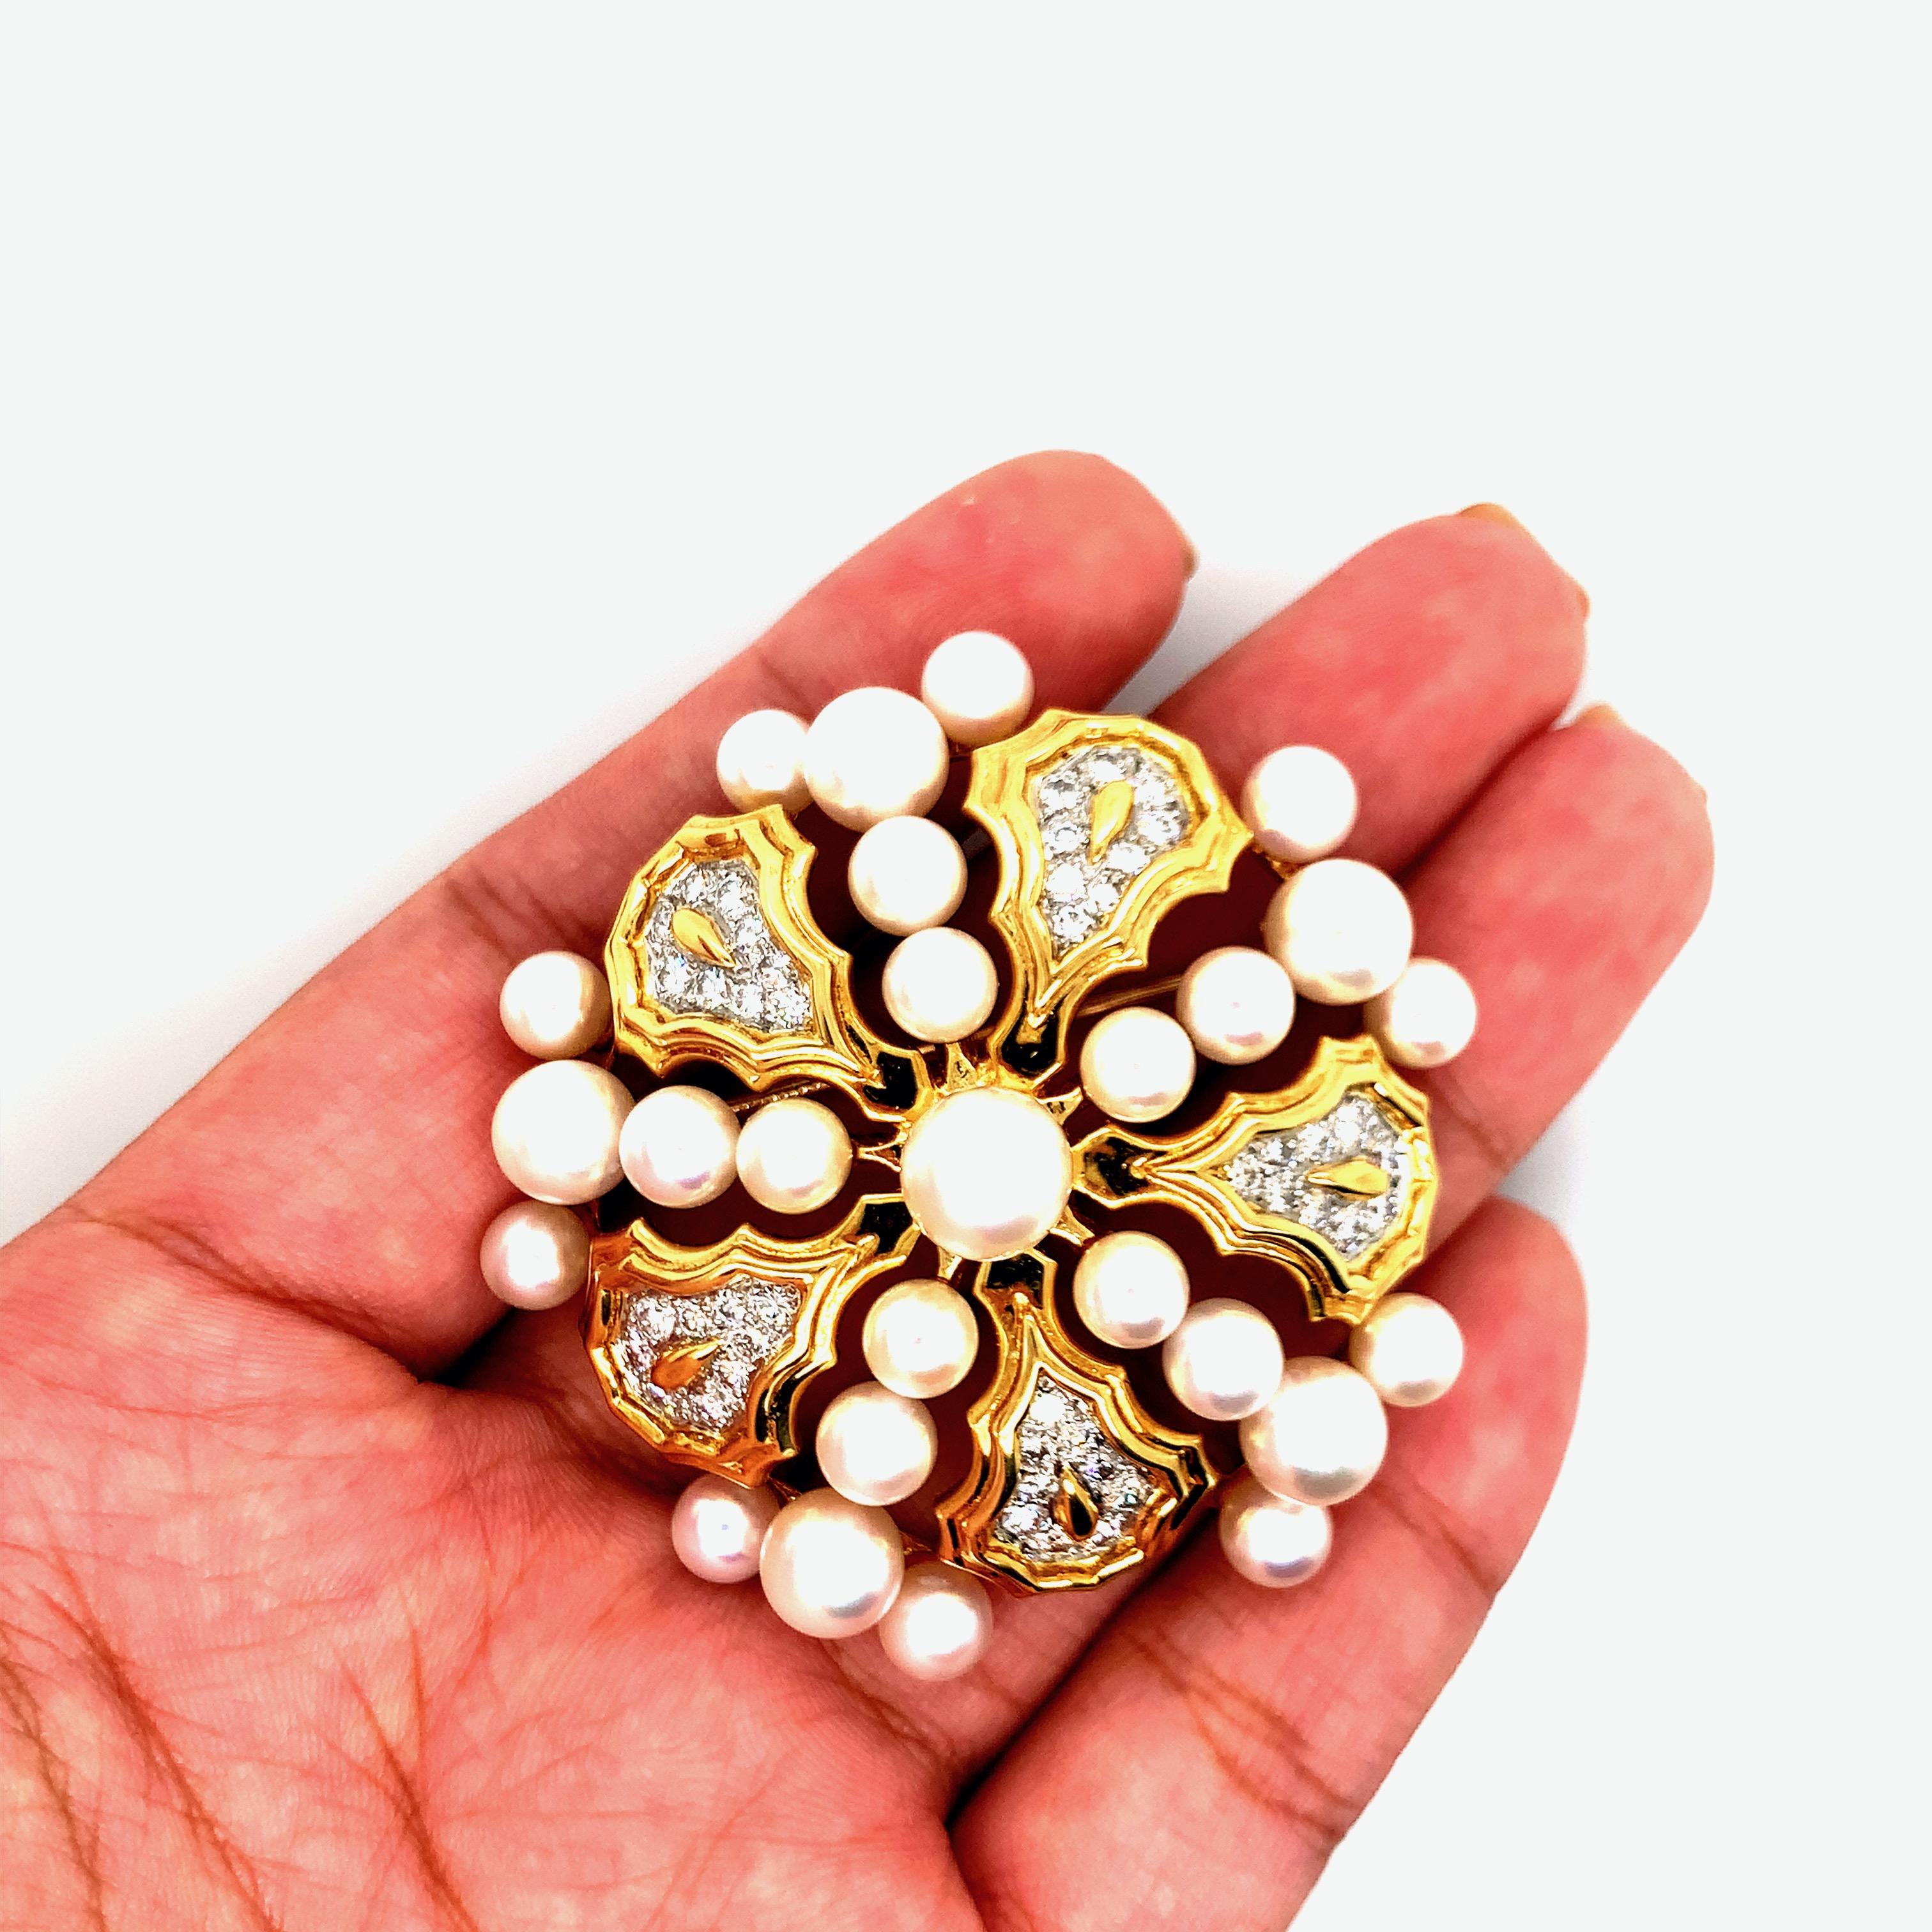 Tiffany & Co. Gold Diamond and Pearl Brooch 3